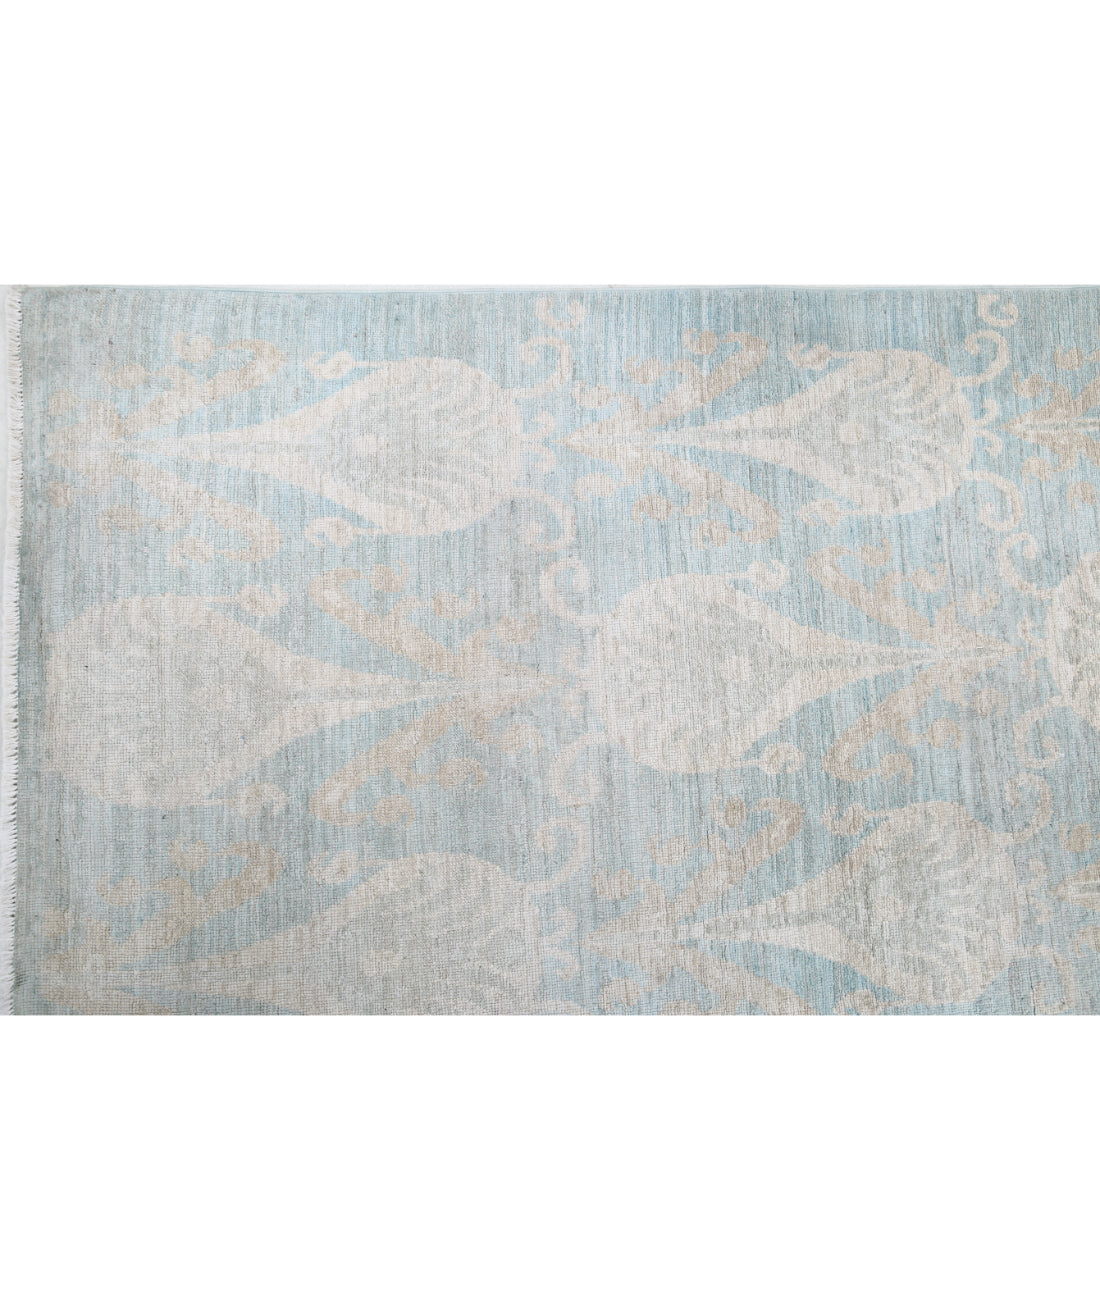 Hand Knotted Ikat Wool Rug - 11'4'' x 14'2'' 11'4'' x 14'2'' (340 X 425) / Blue / Blue